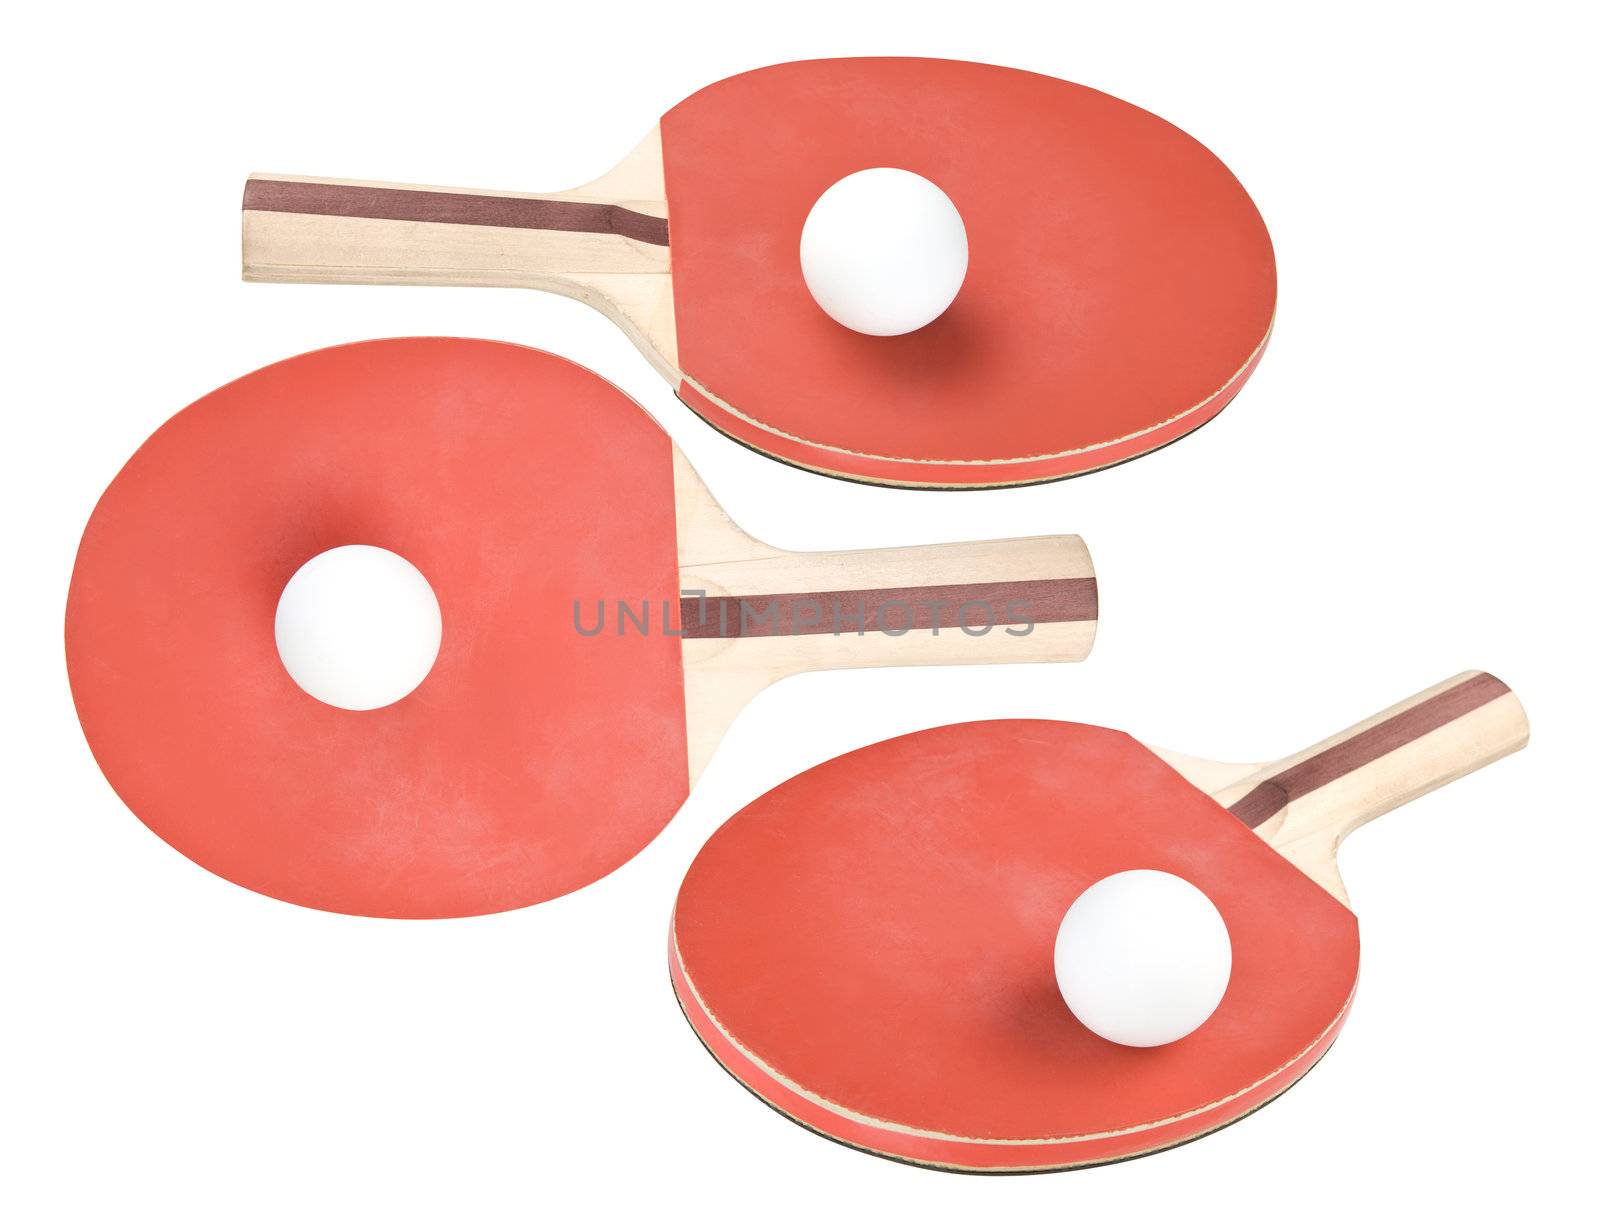 Three ping pong rackets with ball isolated. Clipping pats